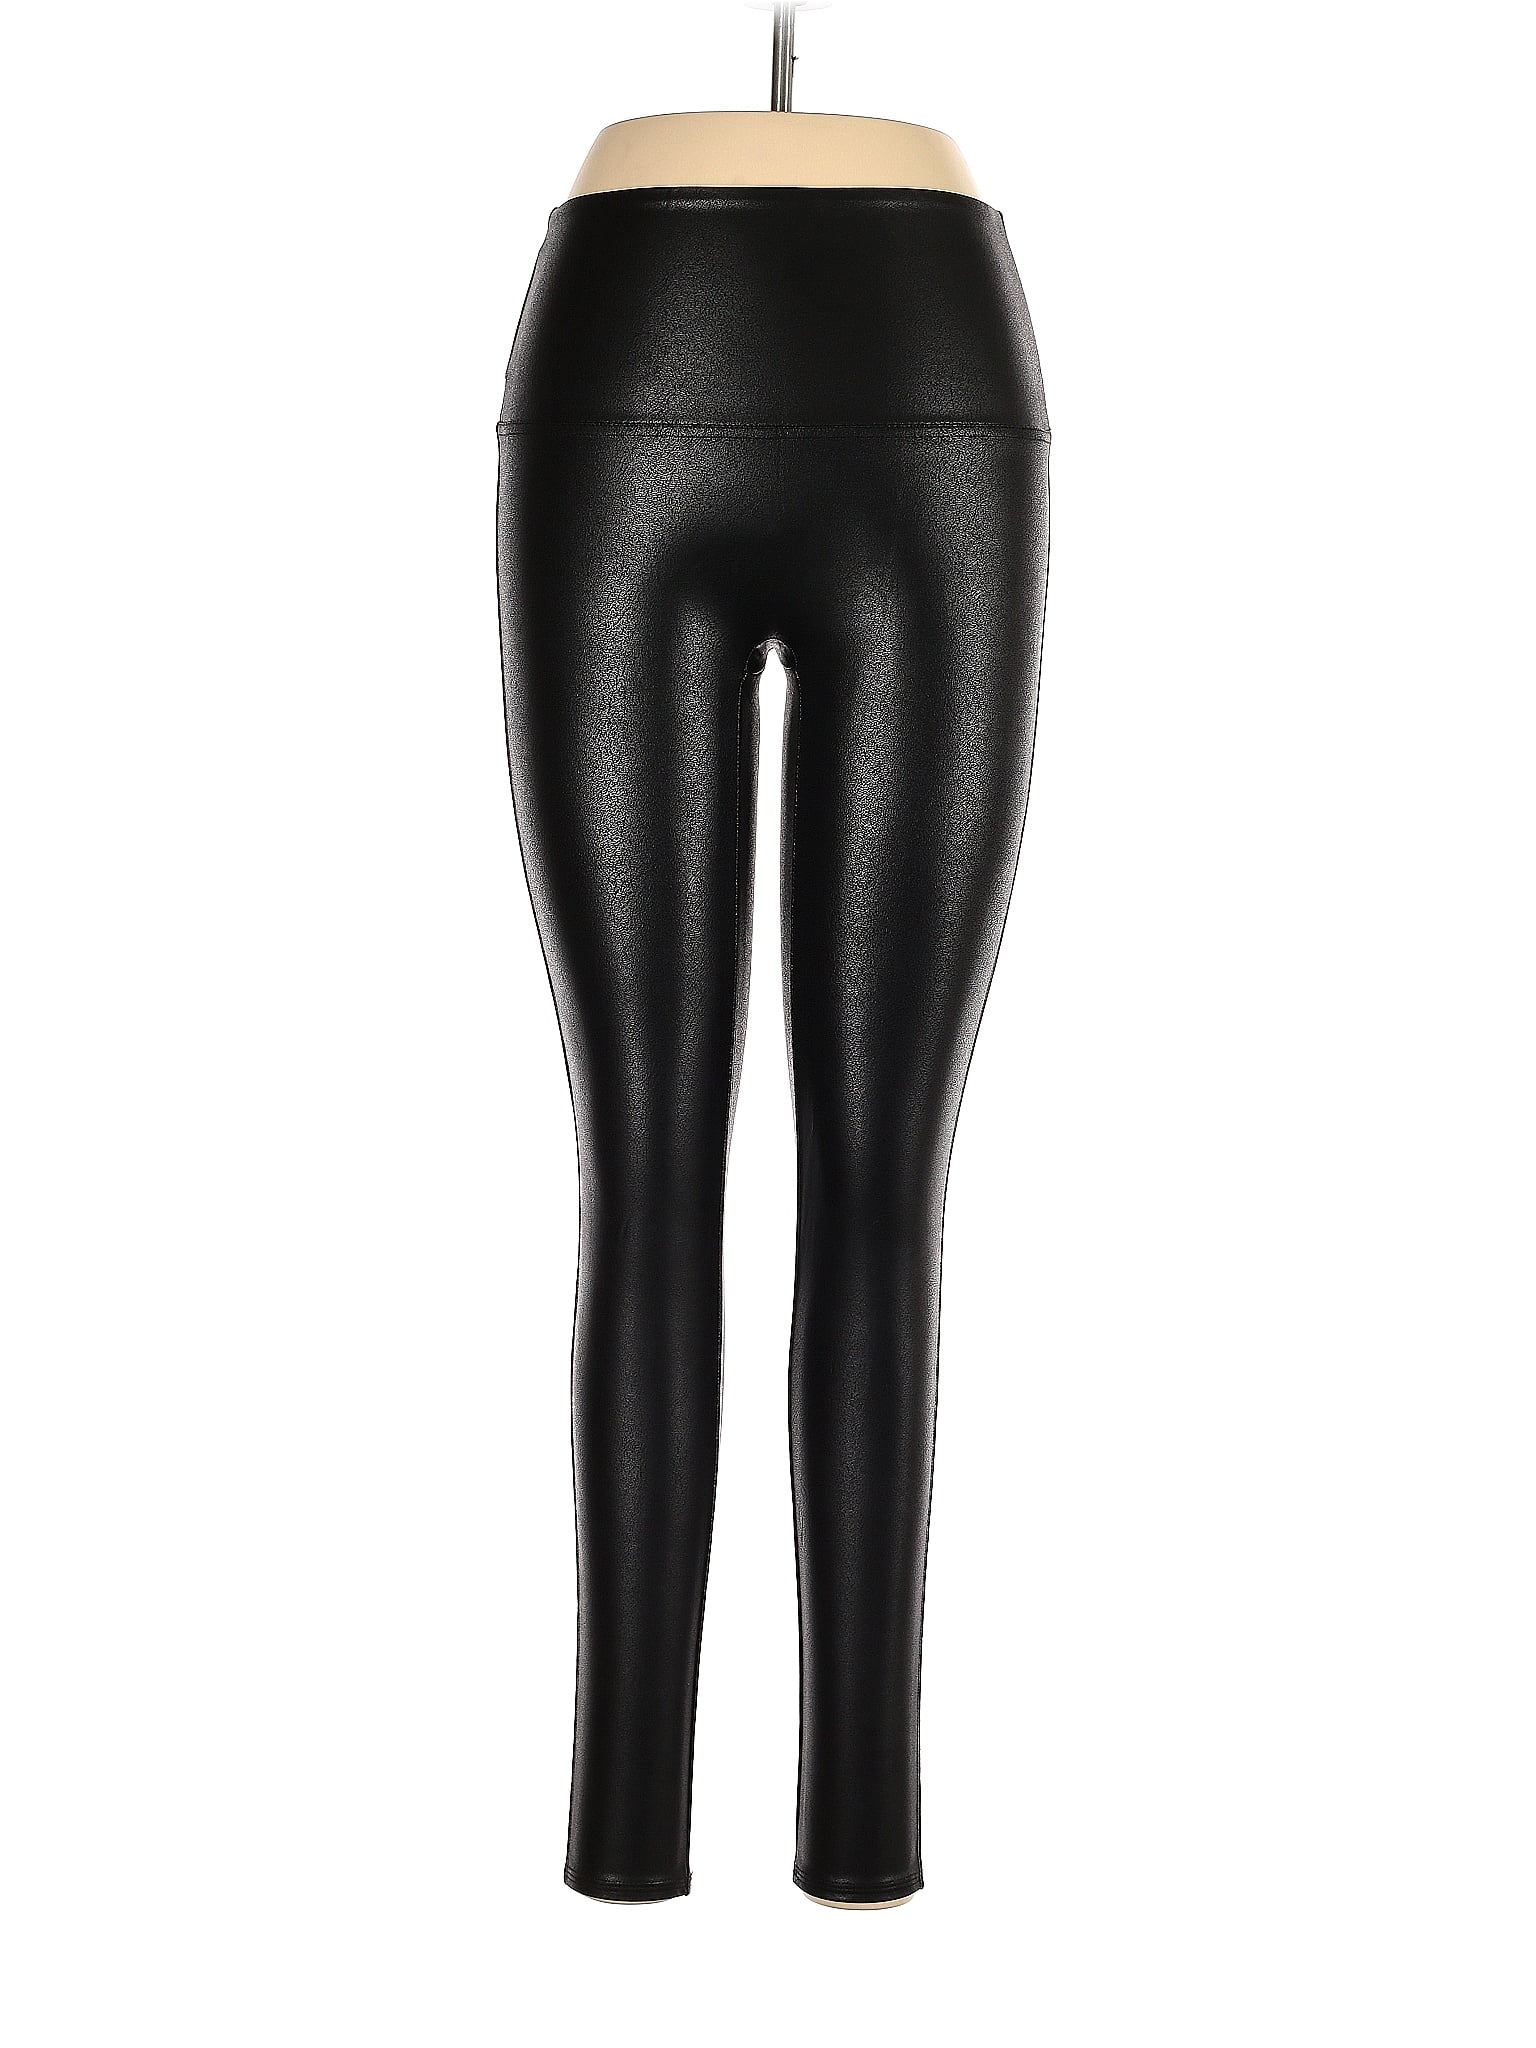 Jane and Bleecker Ladies' Size Large, Faux Leather Legging, Black